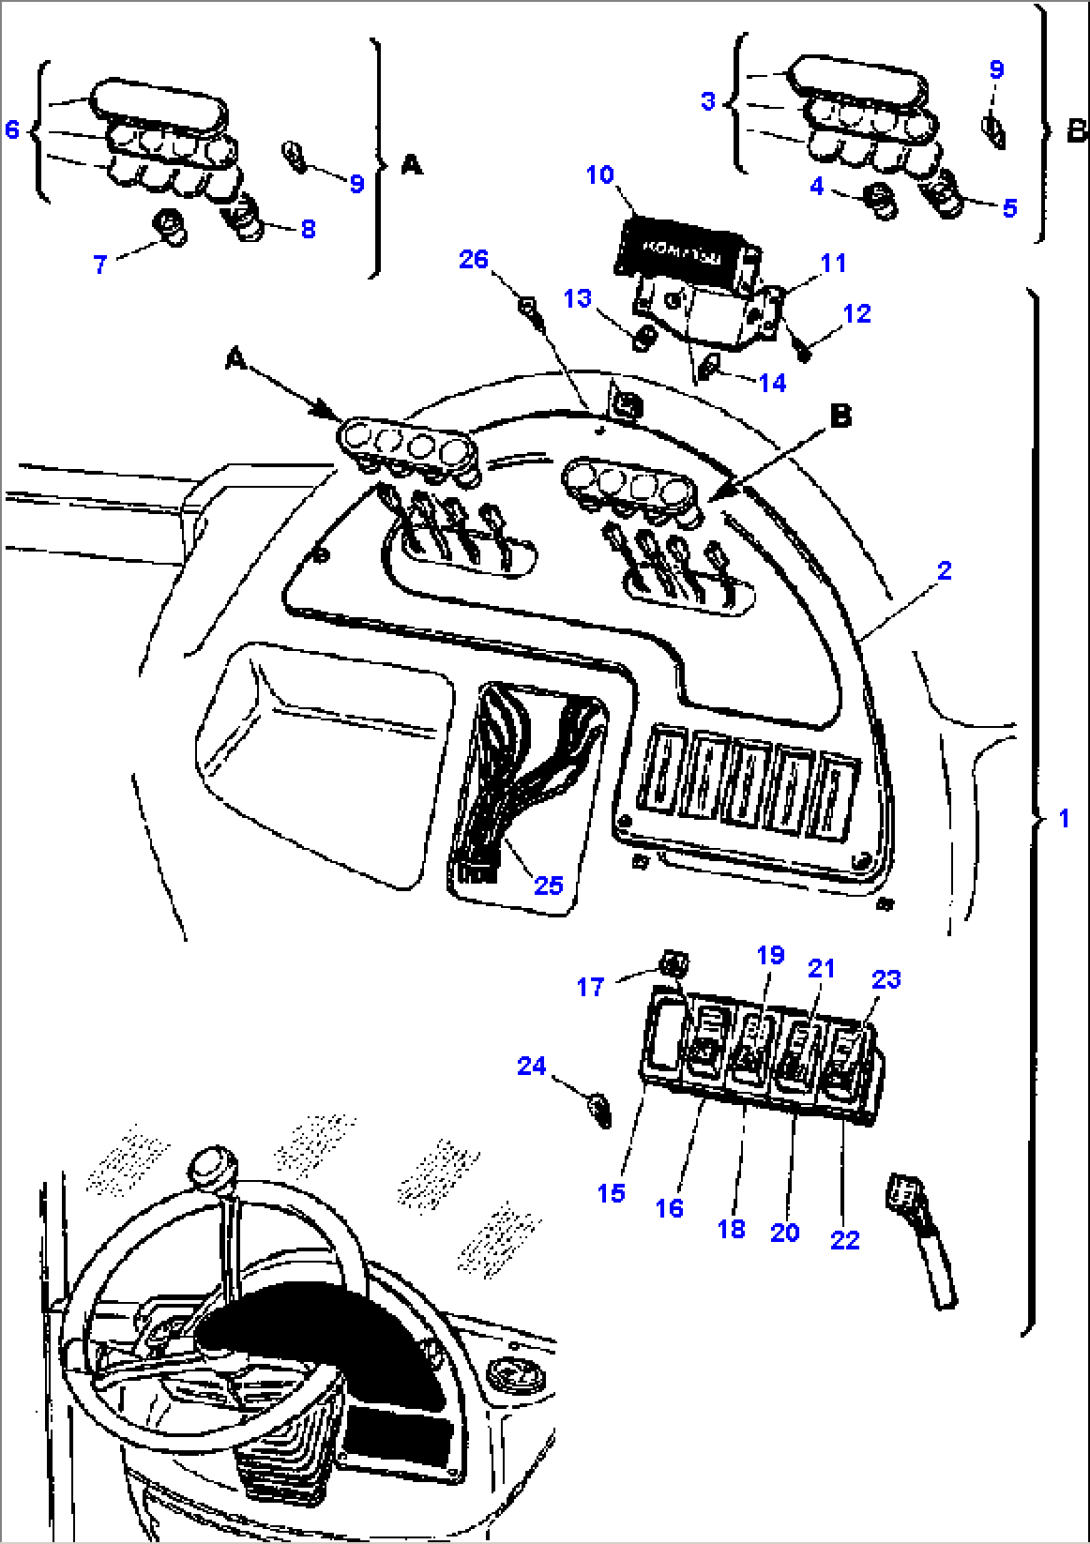 FIG. E1410-01A0 FRONT DASHBOARD